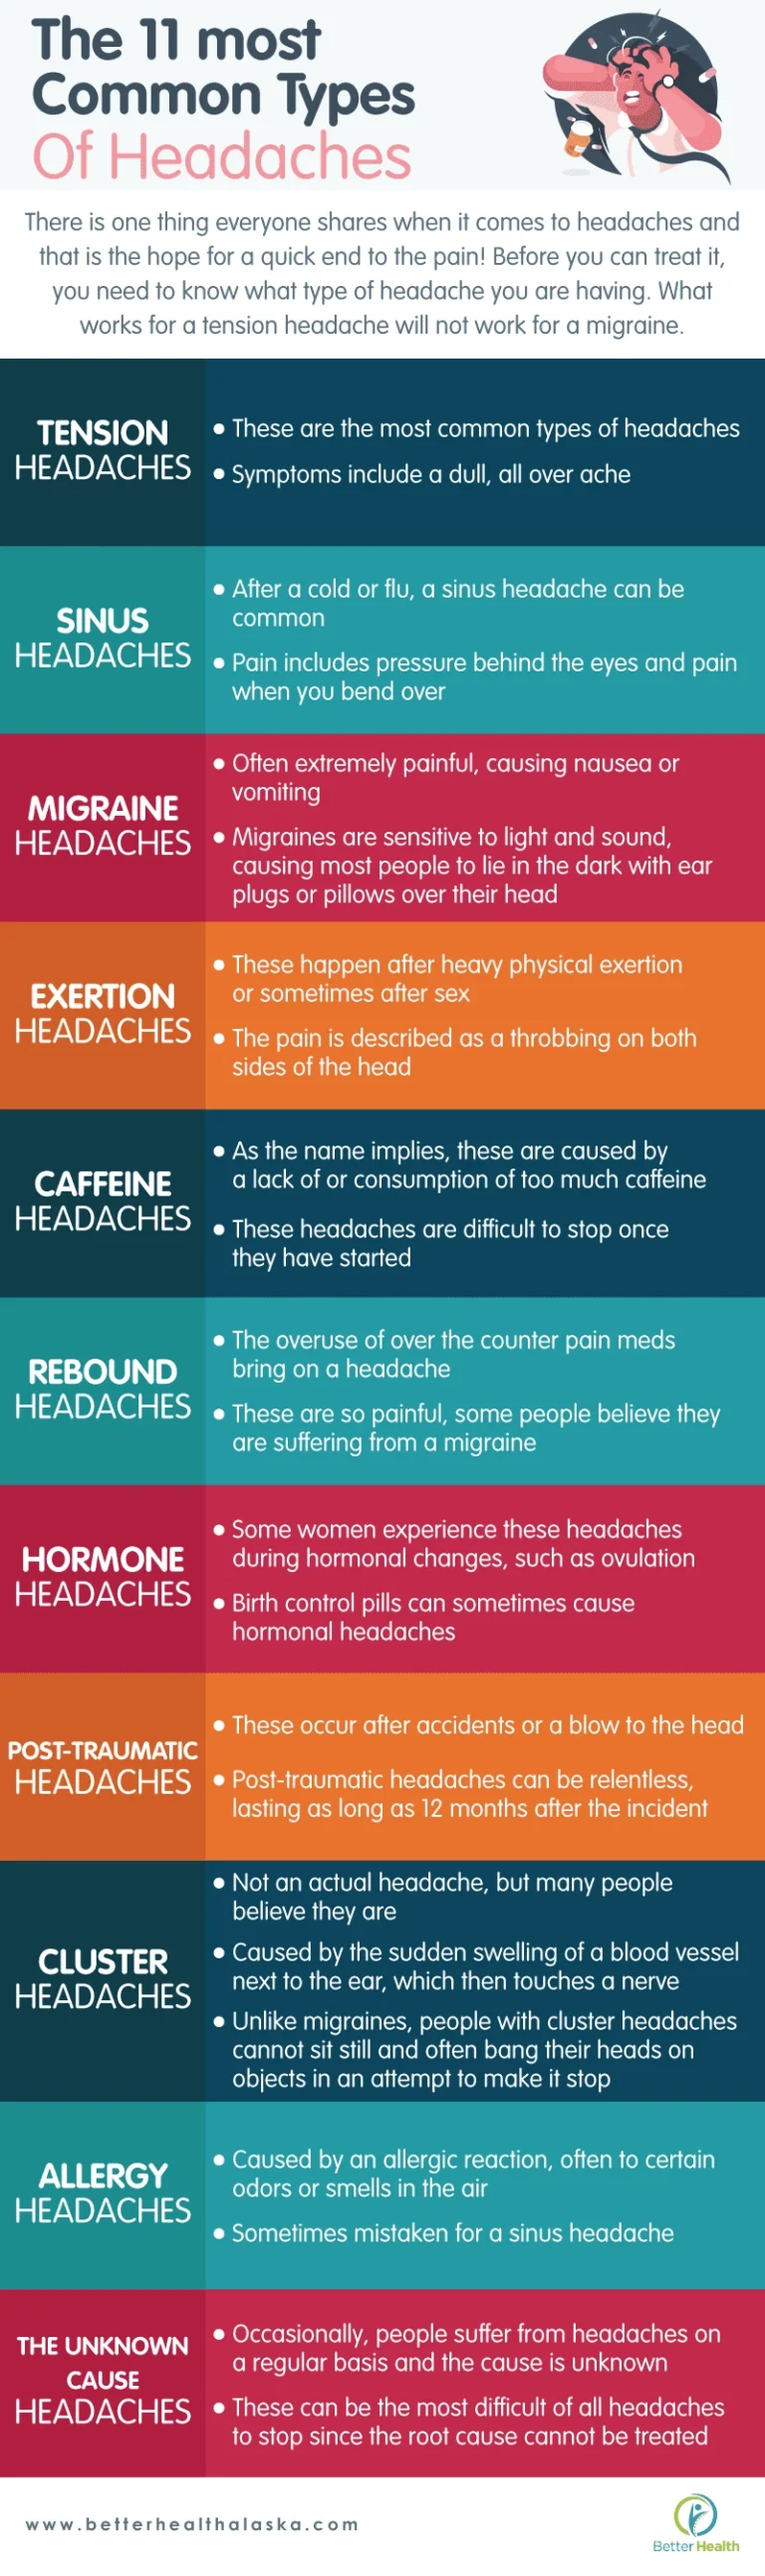 An infographic about the top 11 most common types of headaches.